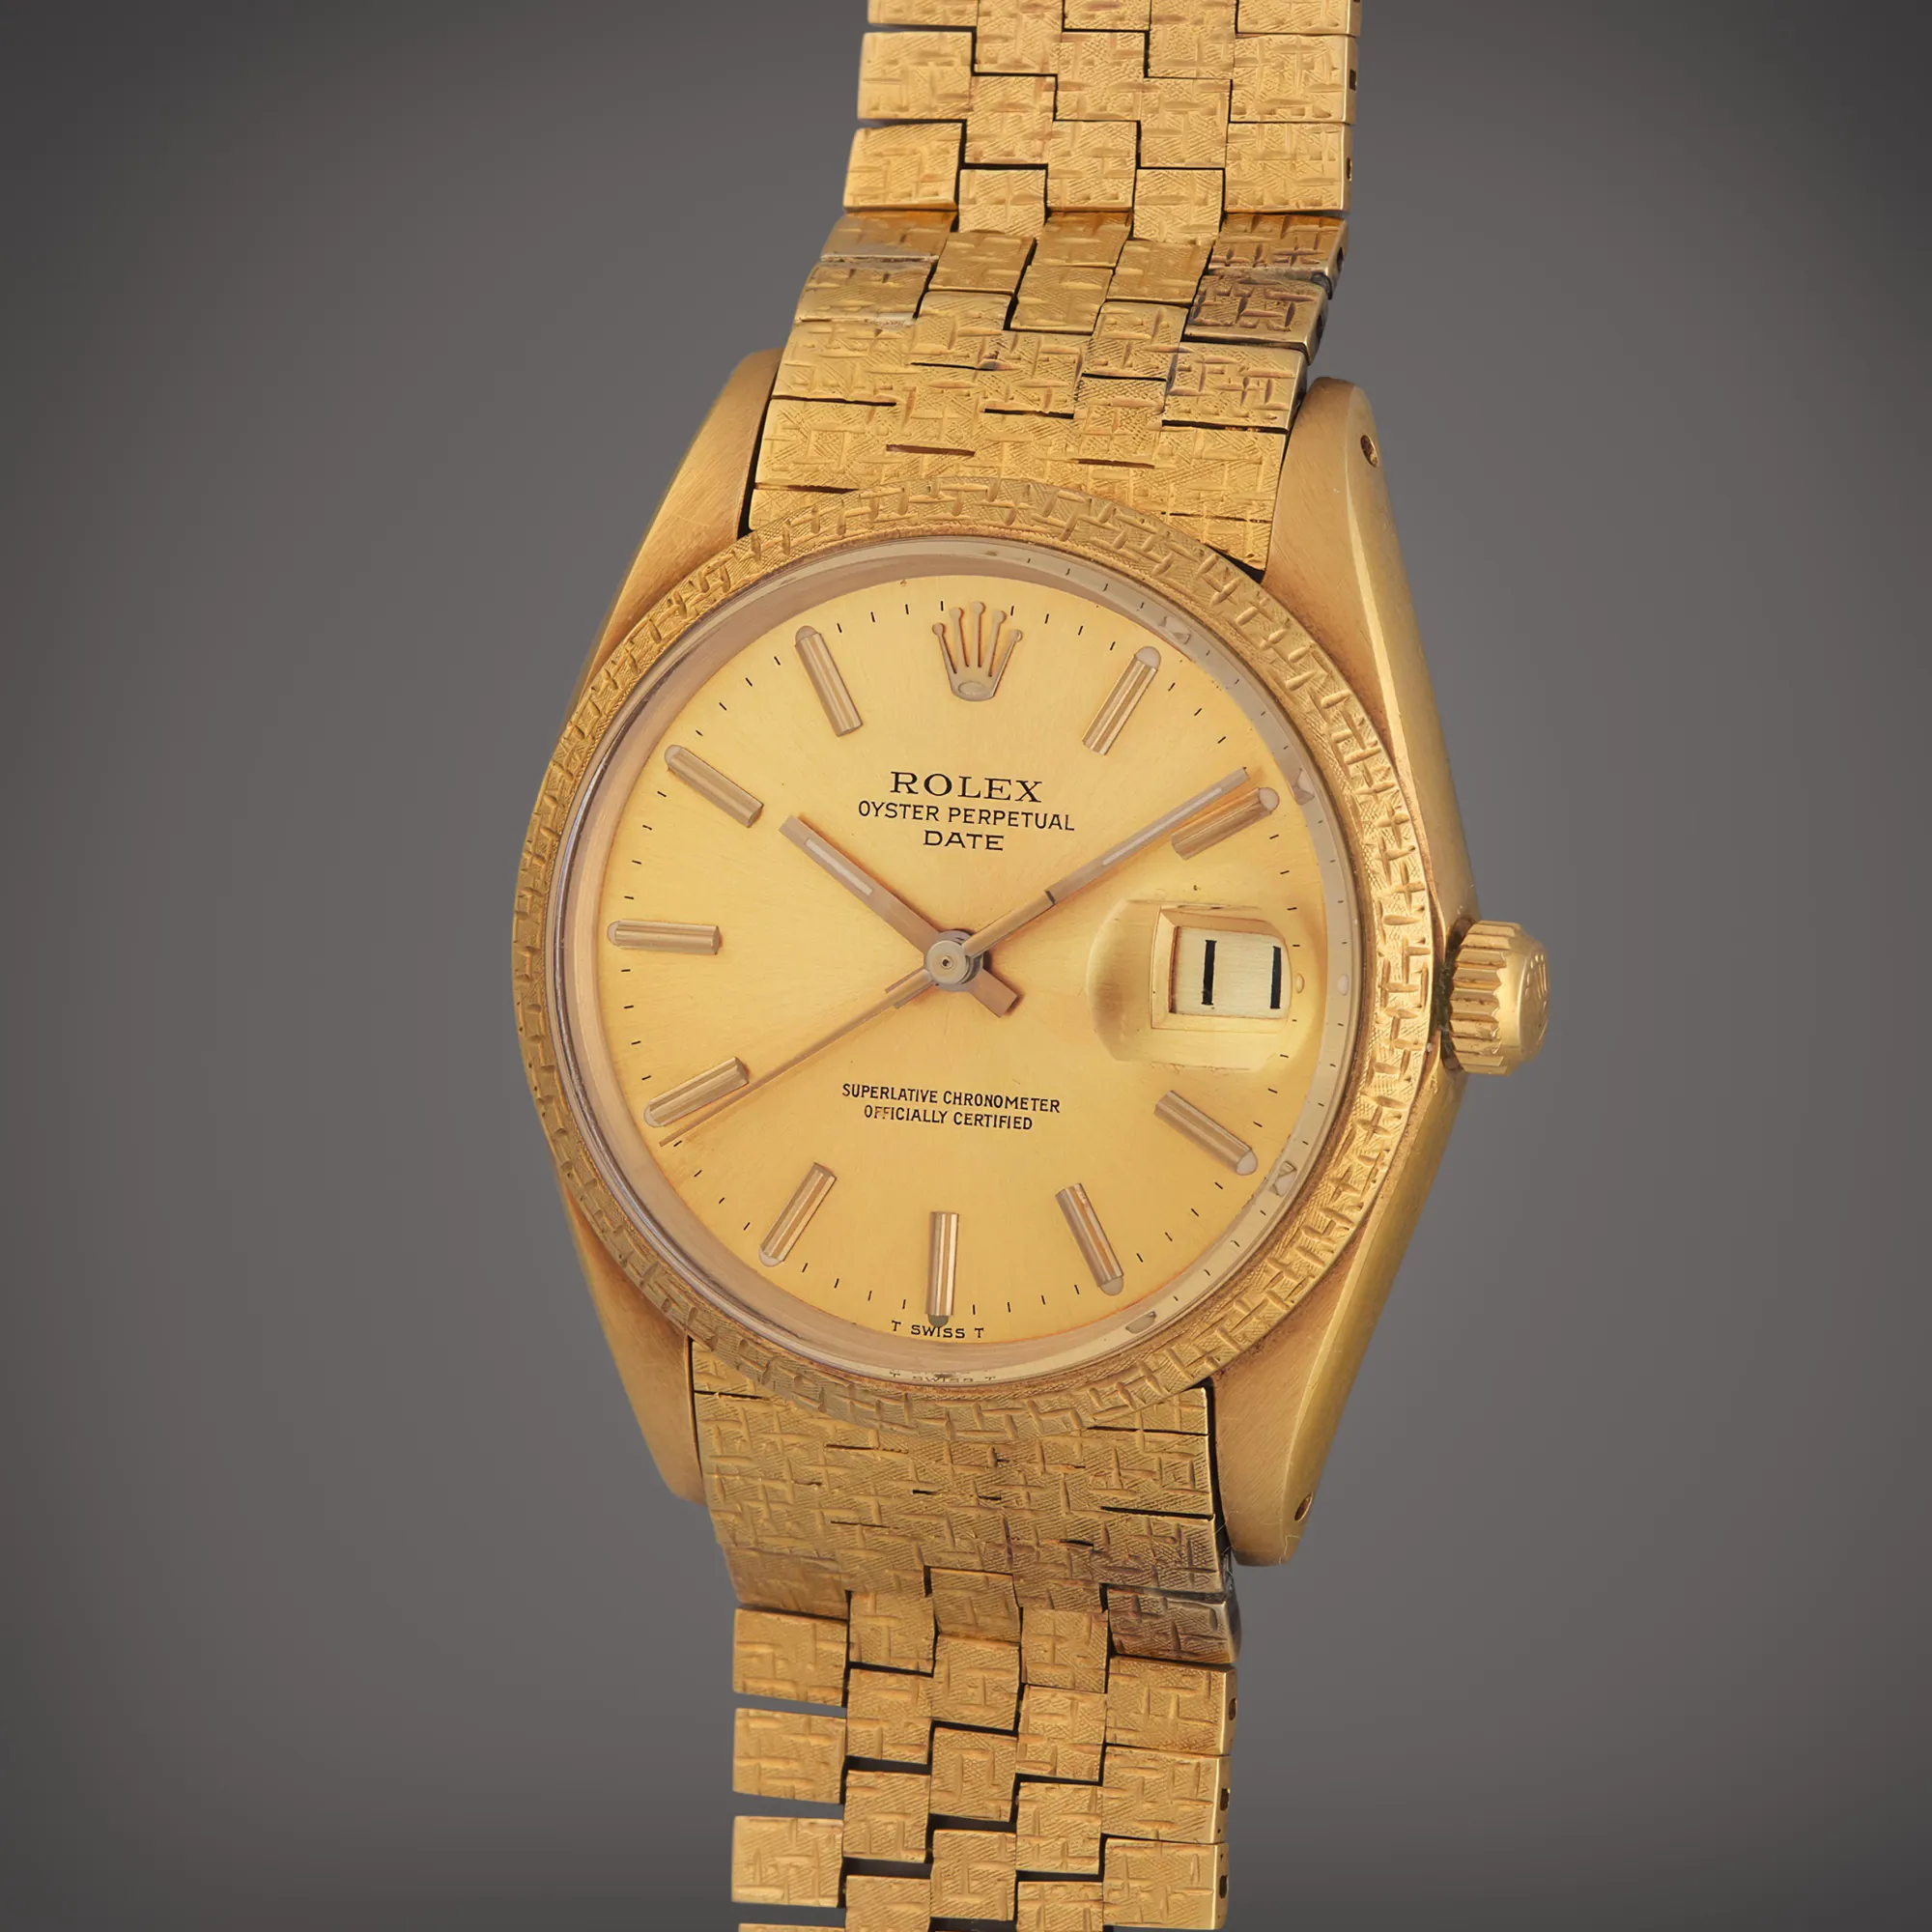 Rolex Oyster Perpetual Date 1503 nullmm